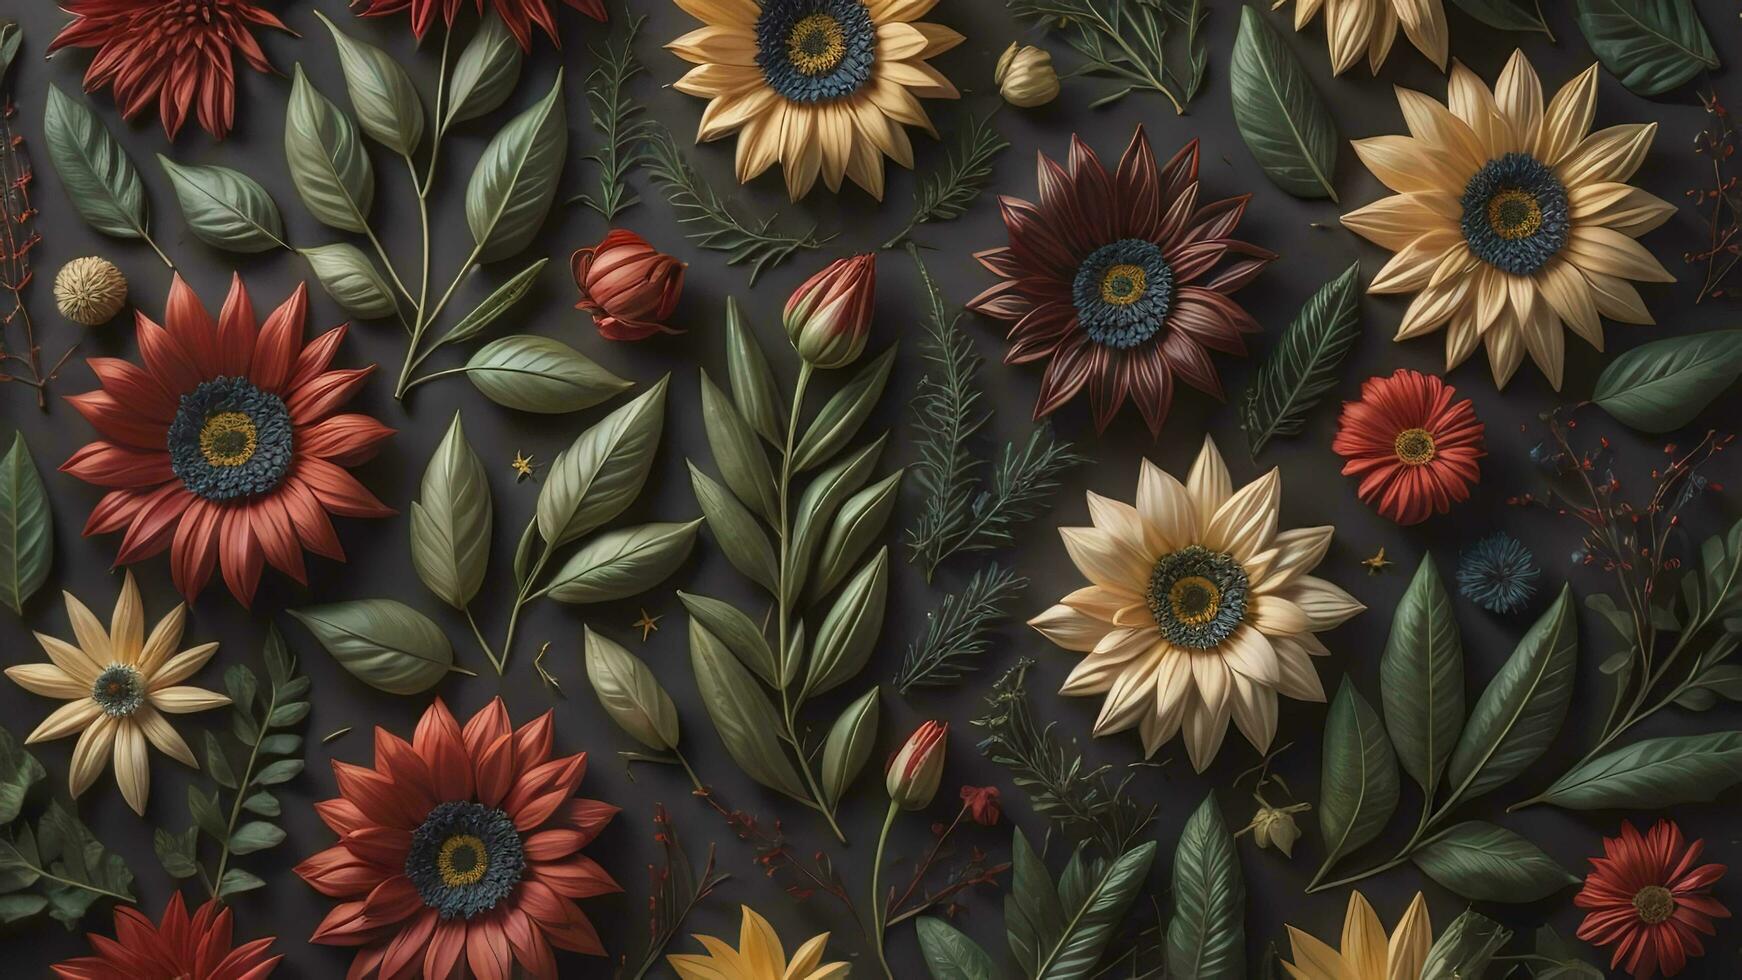 A pattern of sunflowers and leaves on a black background - Flat lay